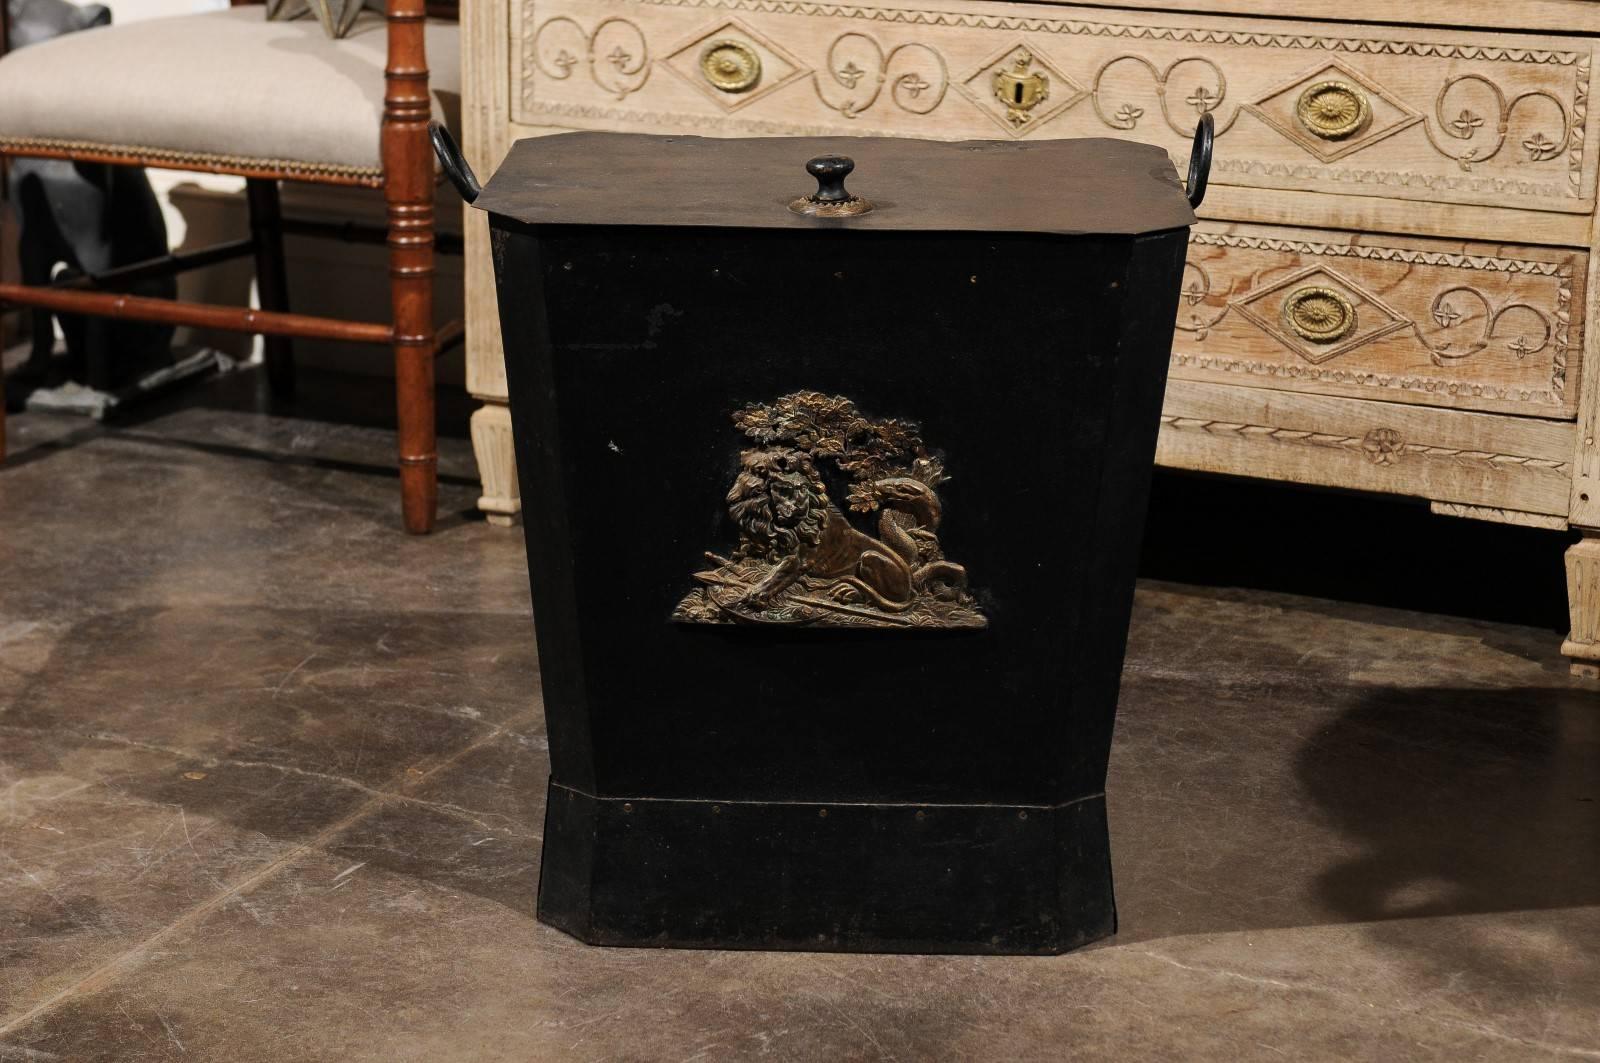 An English black painted metal coal hod with bronze lion from the late 19th century. This English coal hod or coal scuttle features a rectangular lid with canted sides and round pull, flanked on the sides by two round handles. (A hod or scuttle is